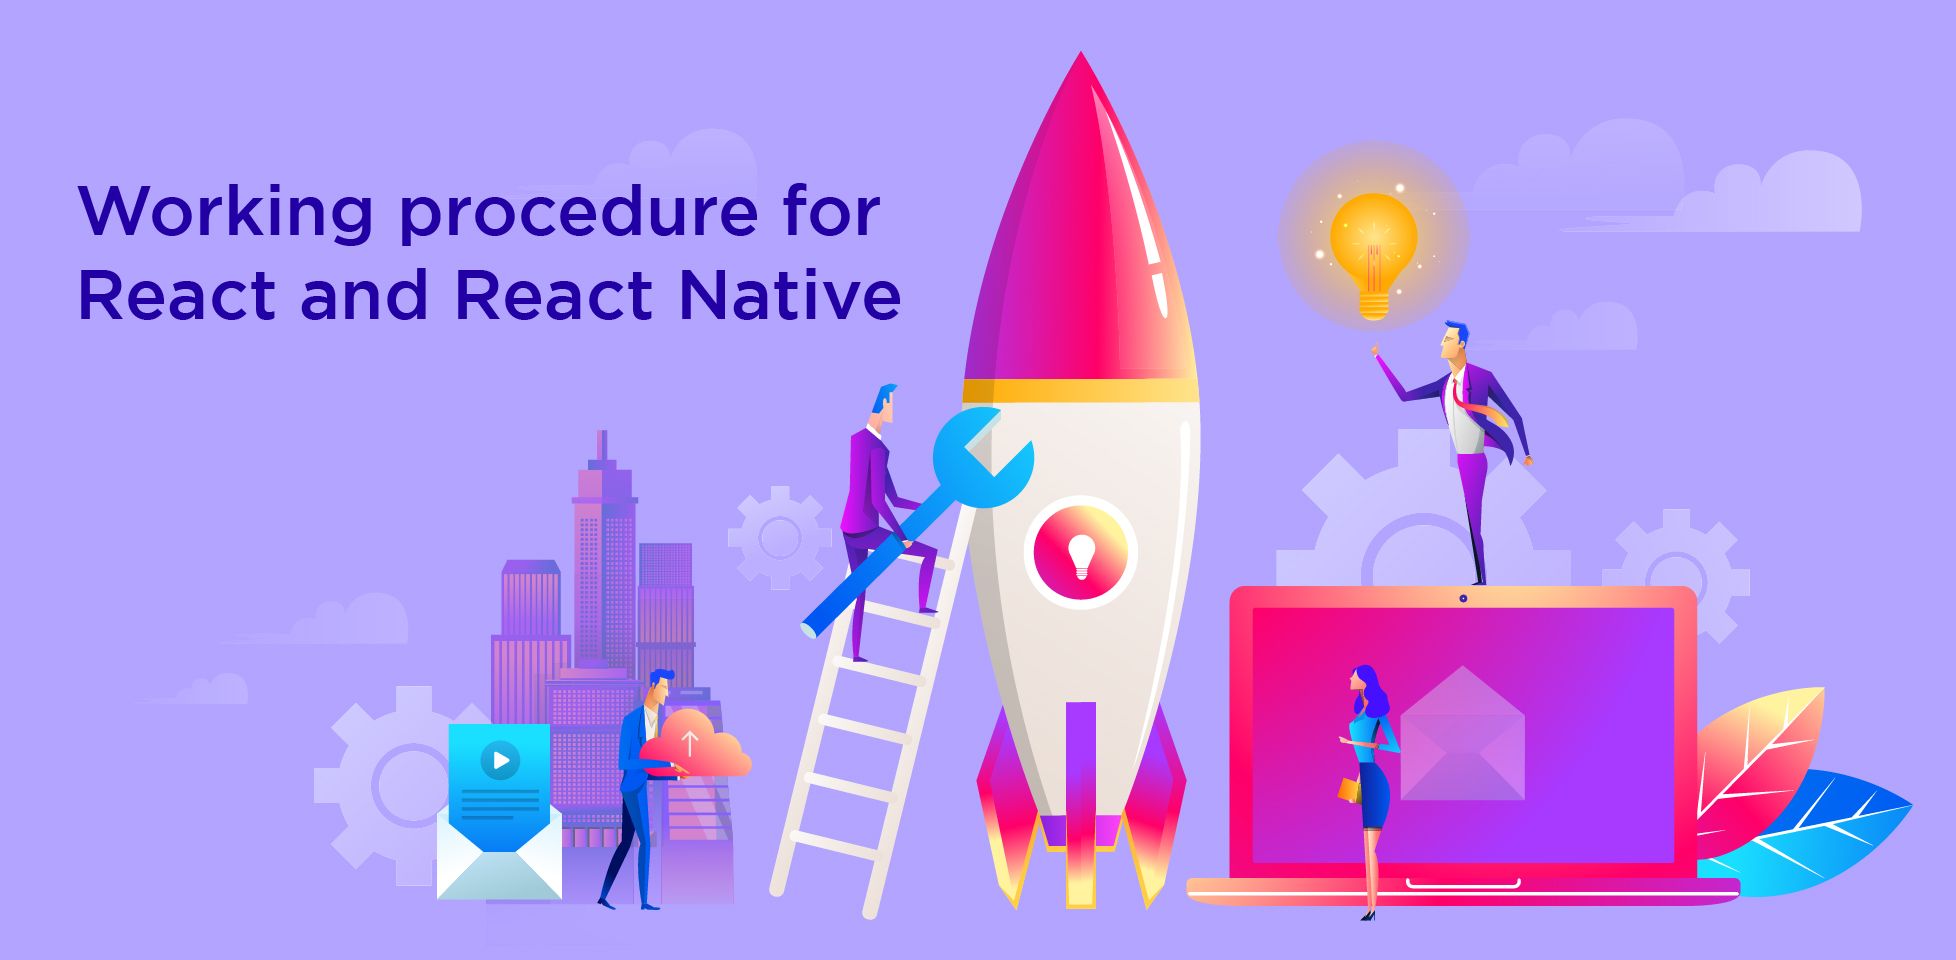 The working procedure for React and React Native!